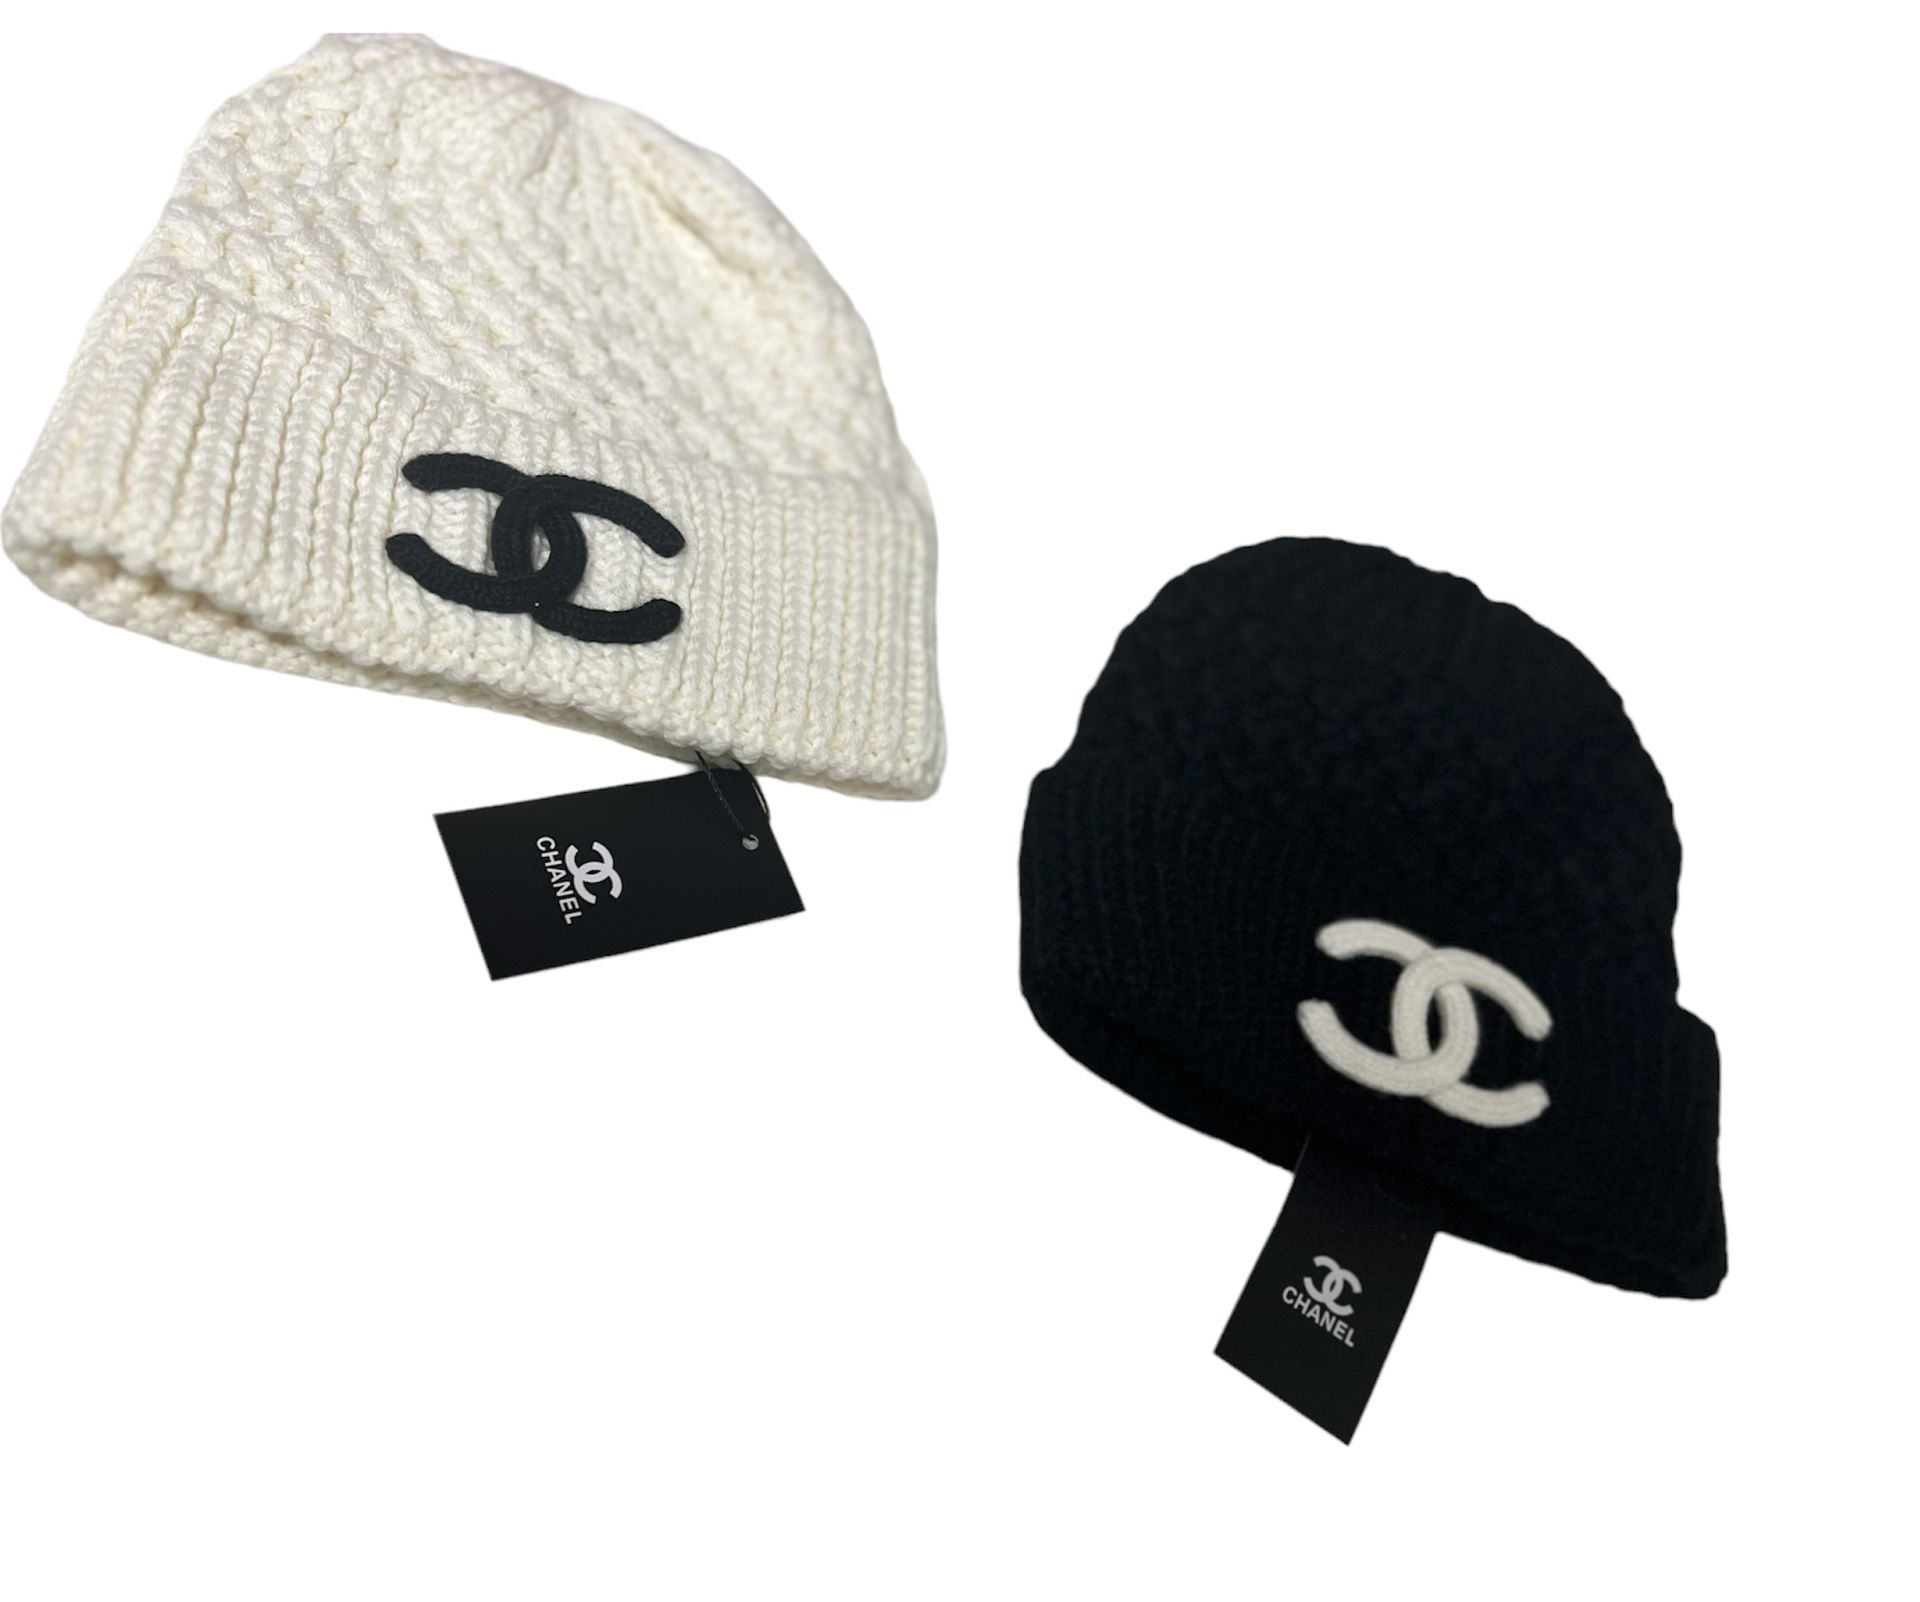 Chanel Winter Hat for Sale in Brooklyn, NY - OfferUp